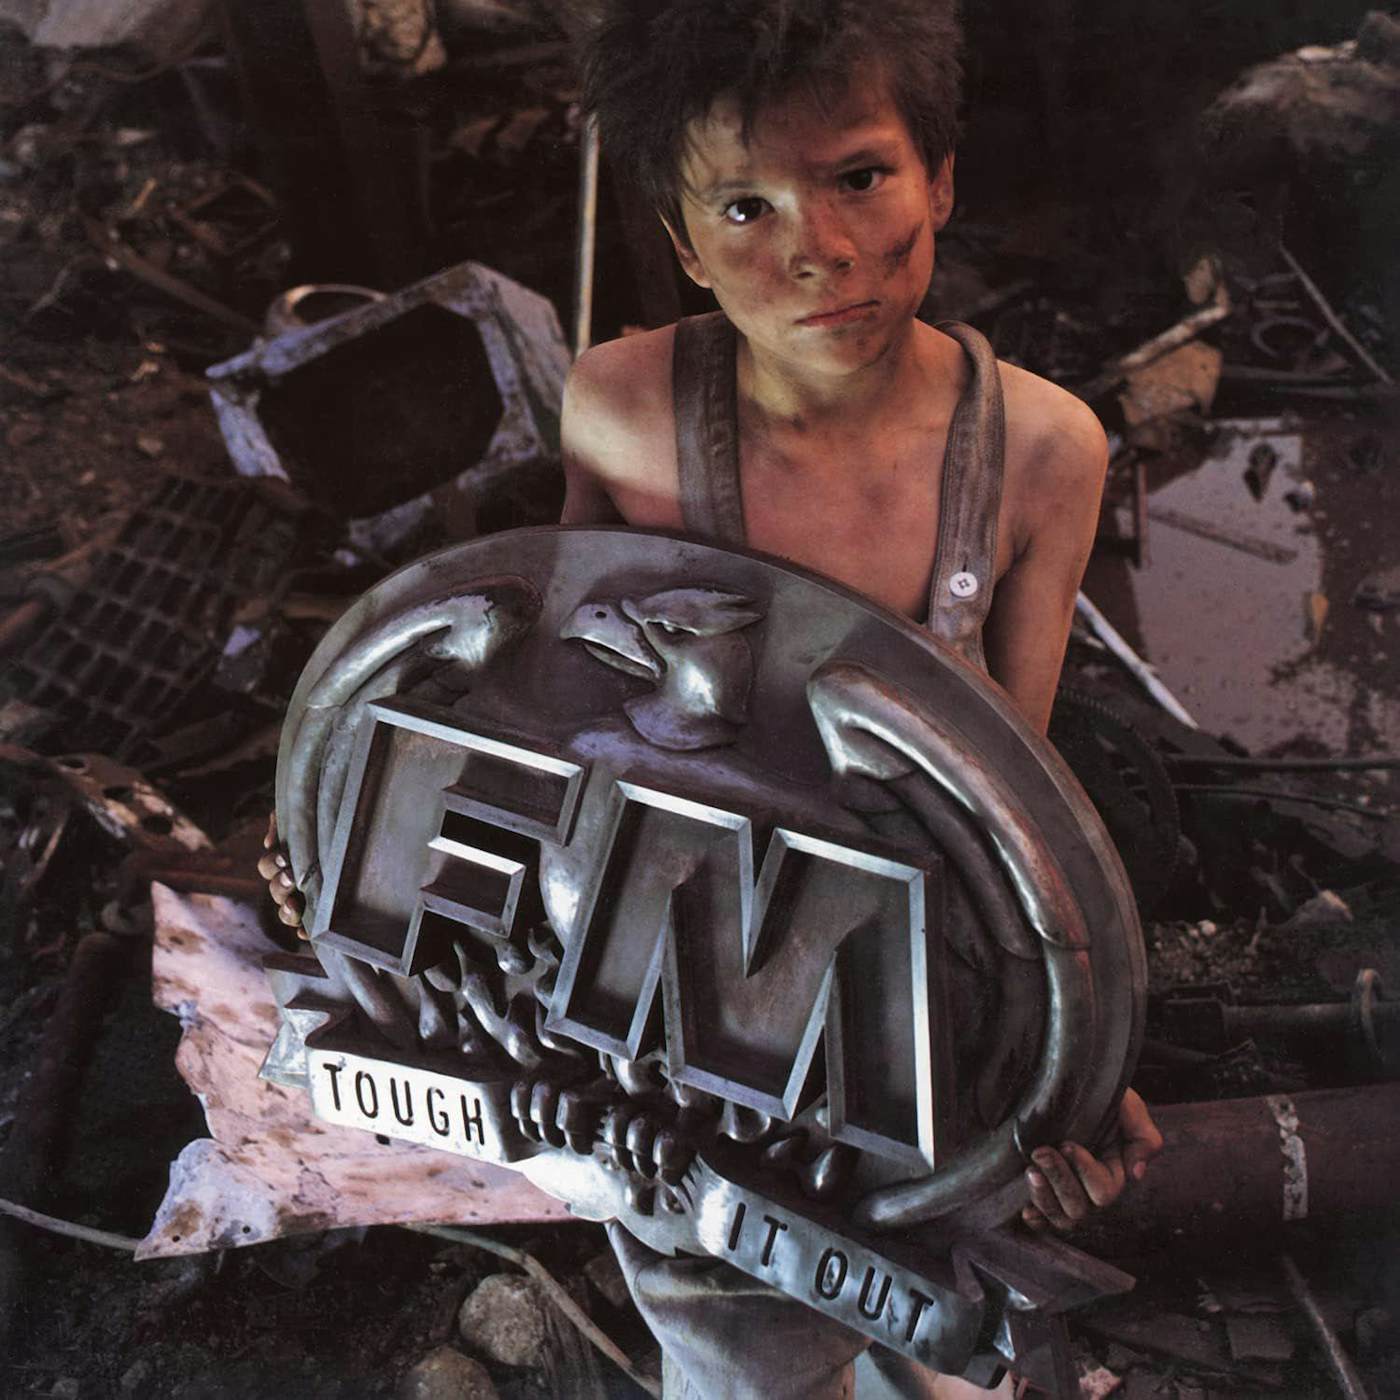 FM Tough It Out (180g/clear & White Marbled Vinyl Record)